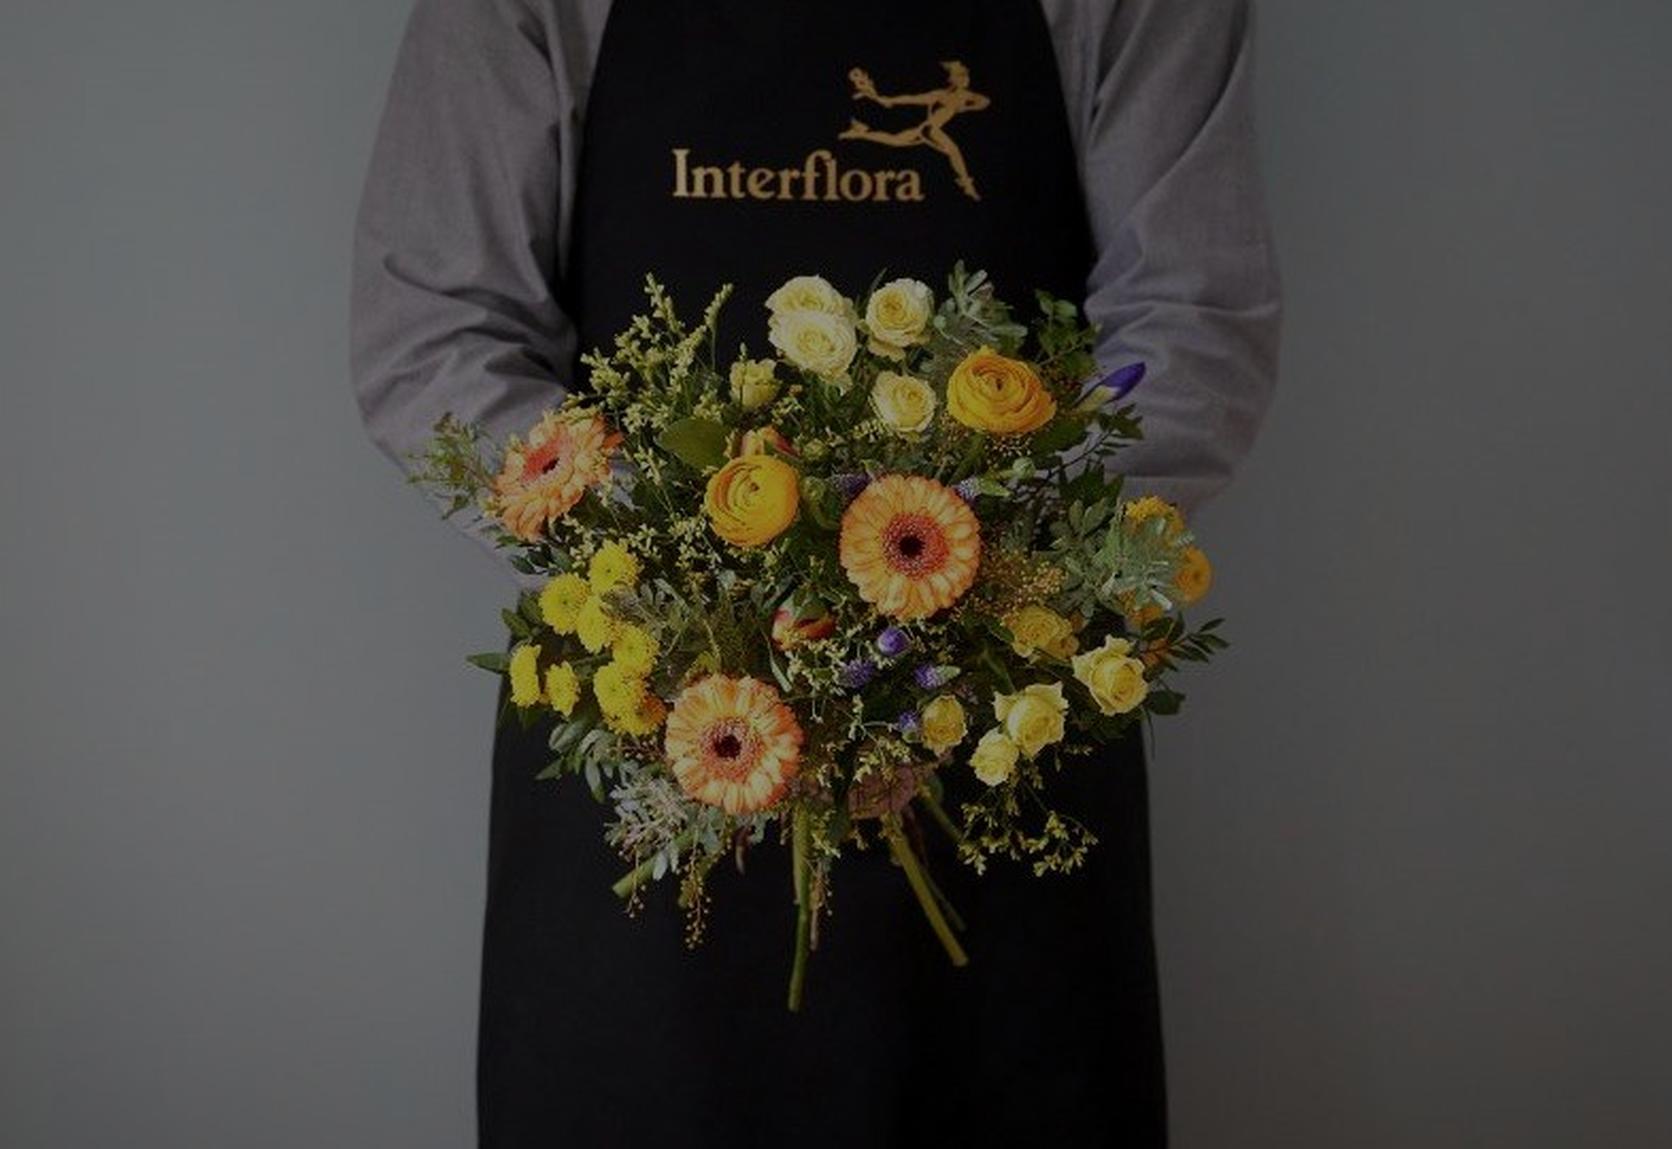 Interflora-florist-with-bright-yellow-bouquet